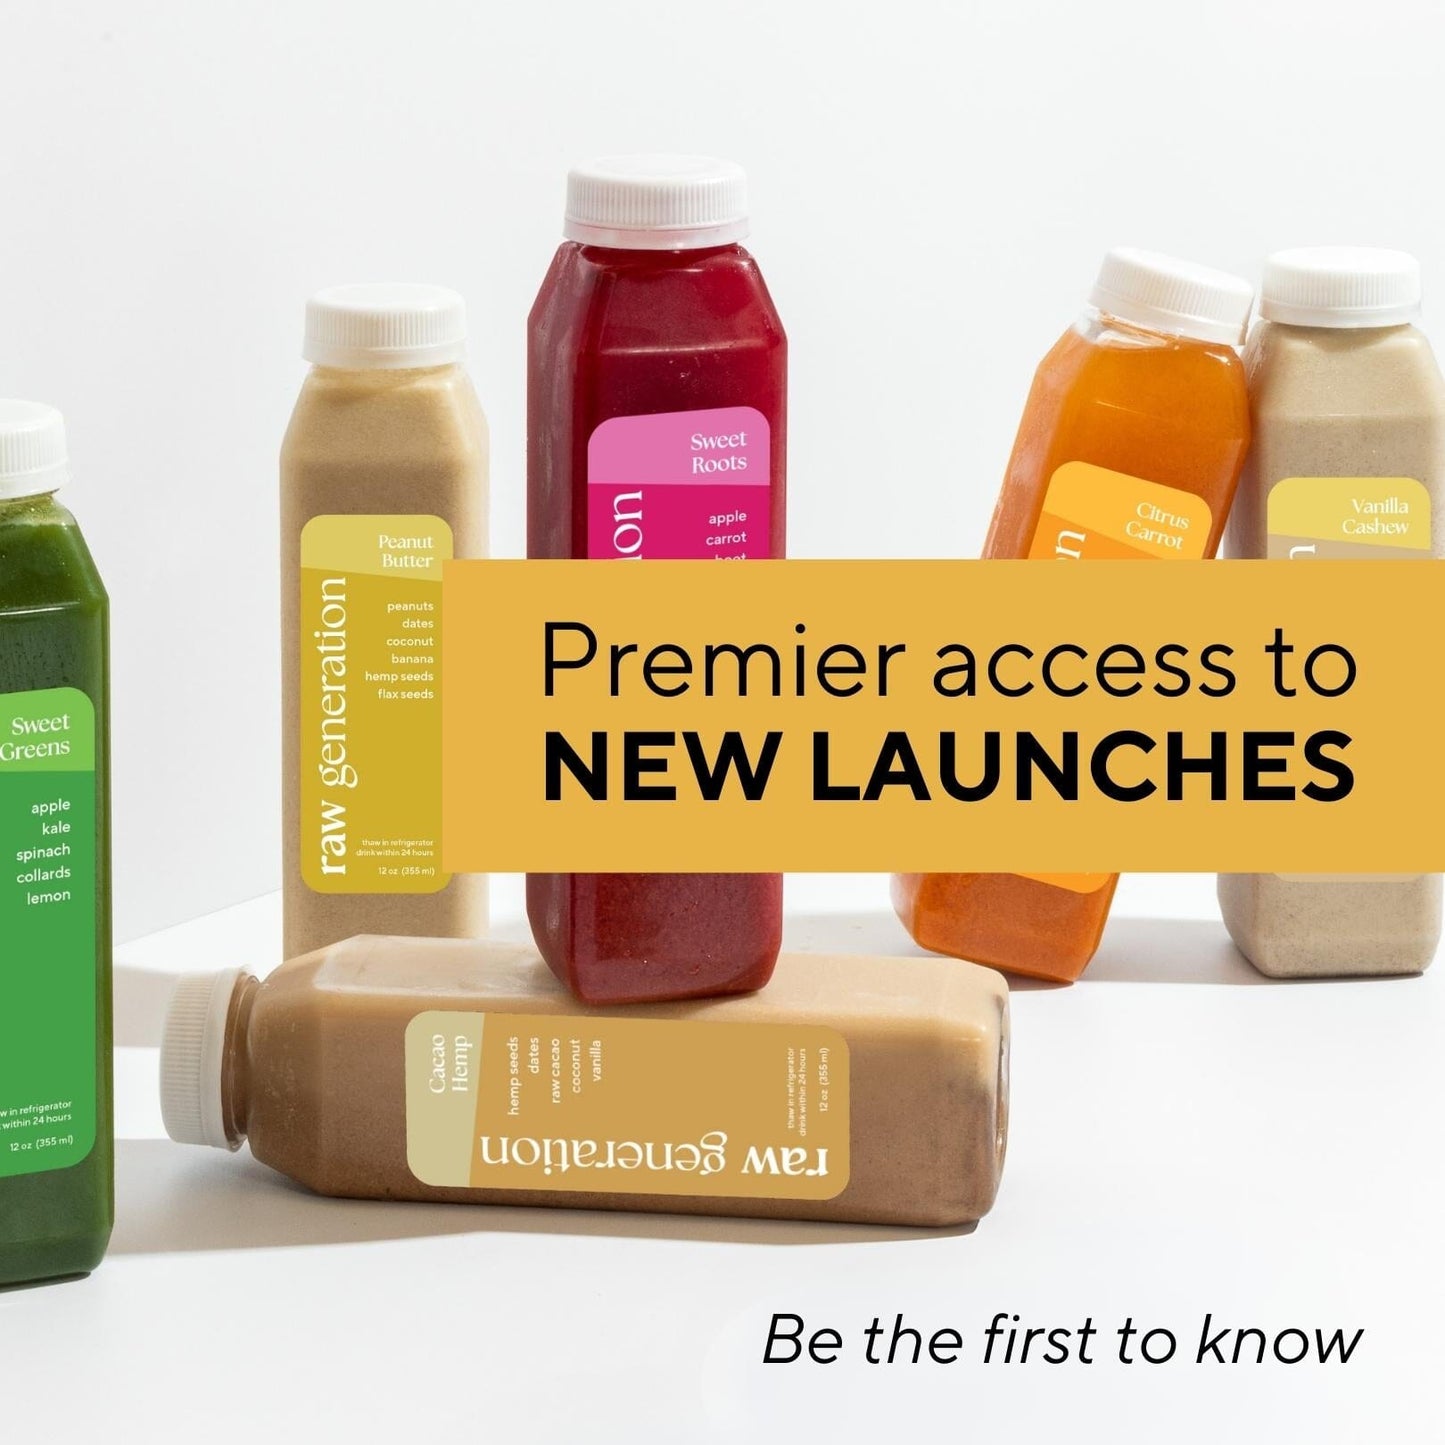 Premier access to product launches with Juice Club membership